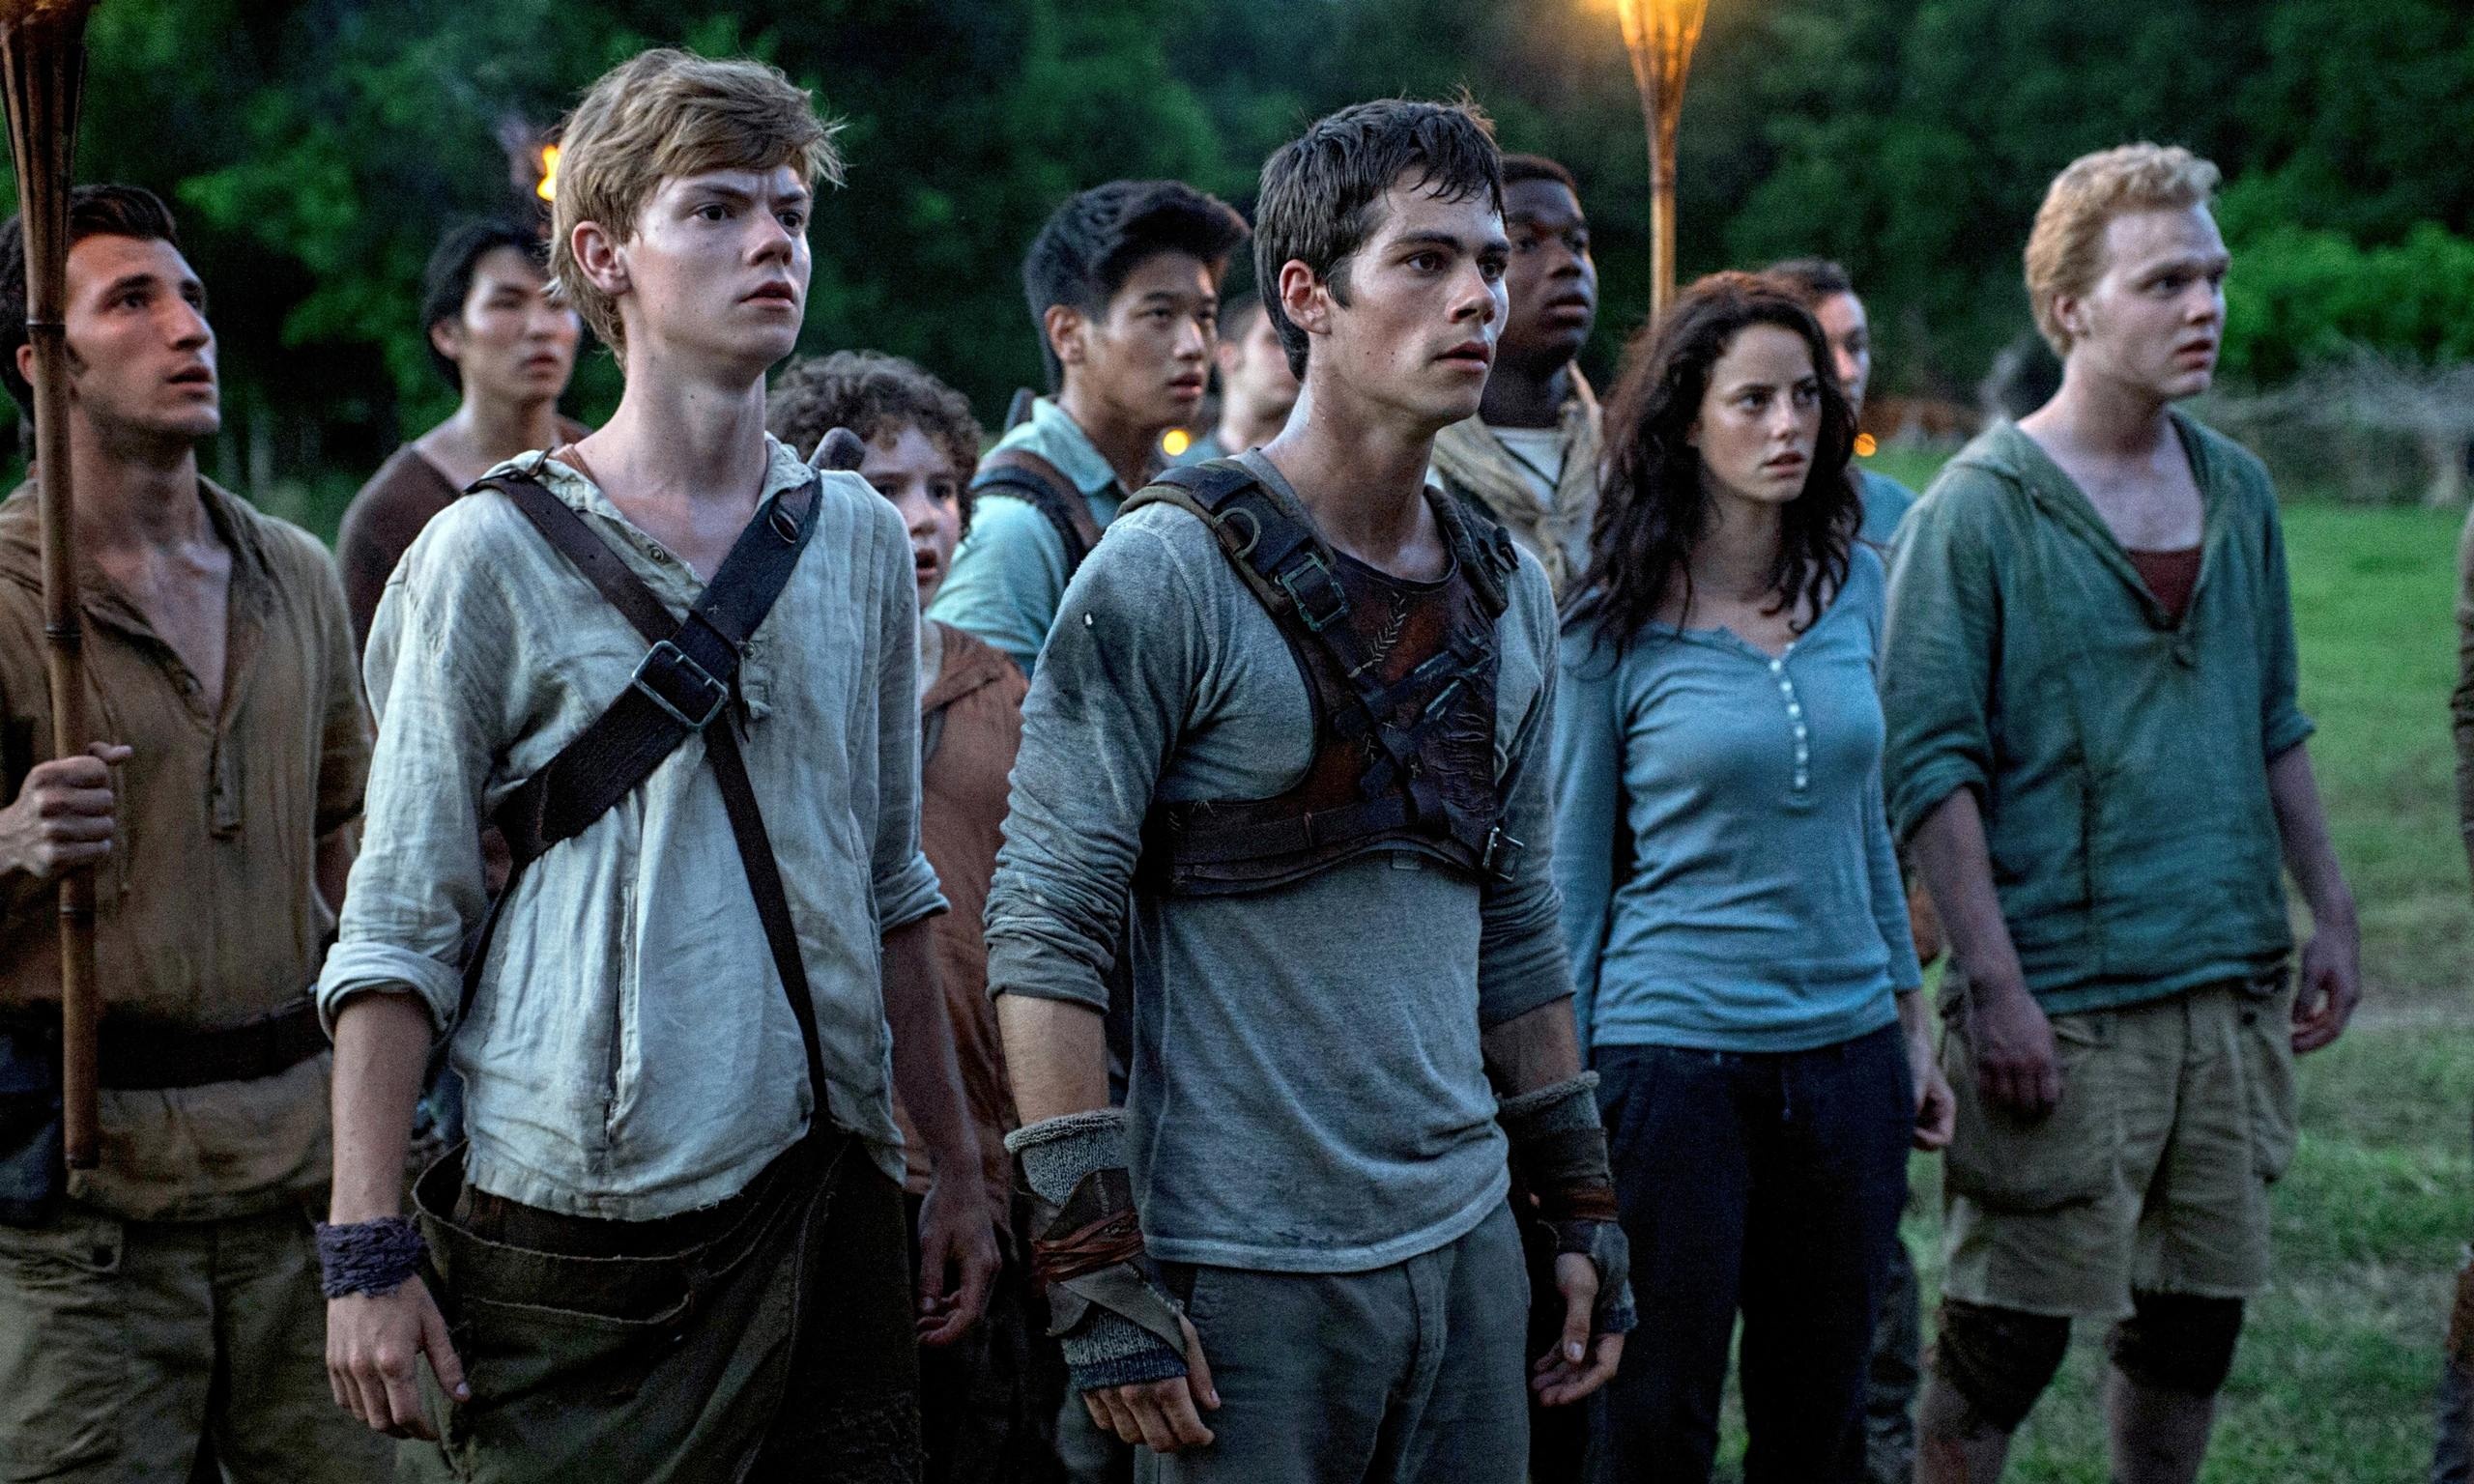 The Maze Runner, Movie wallpapers, High-quality images, 4K resolution, 2560x1540 HD Desktop